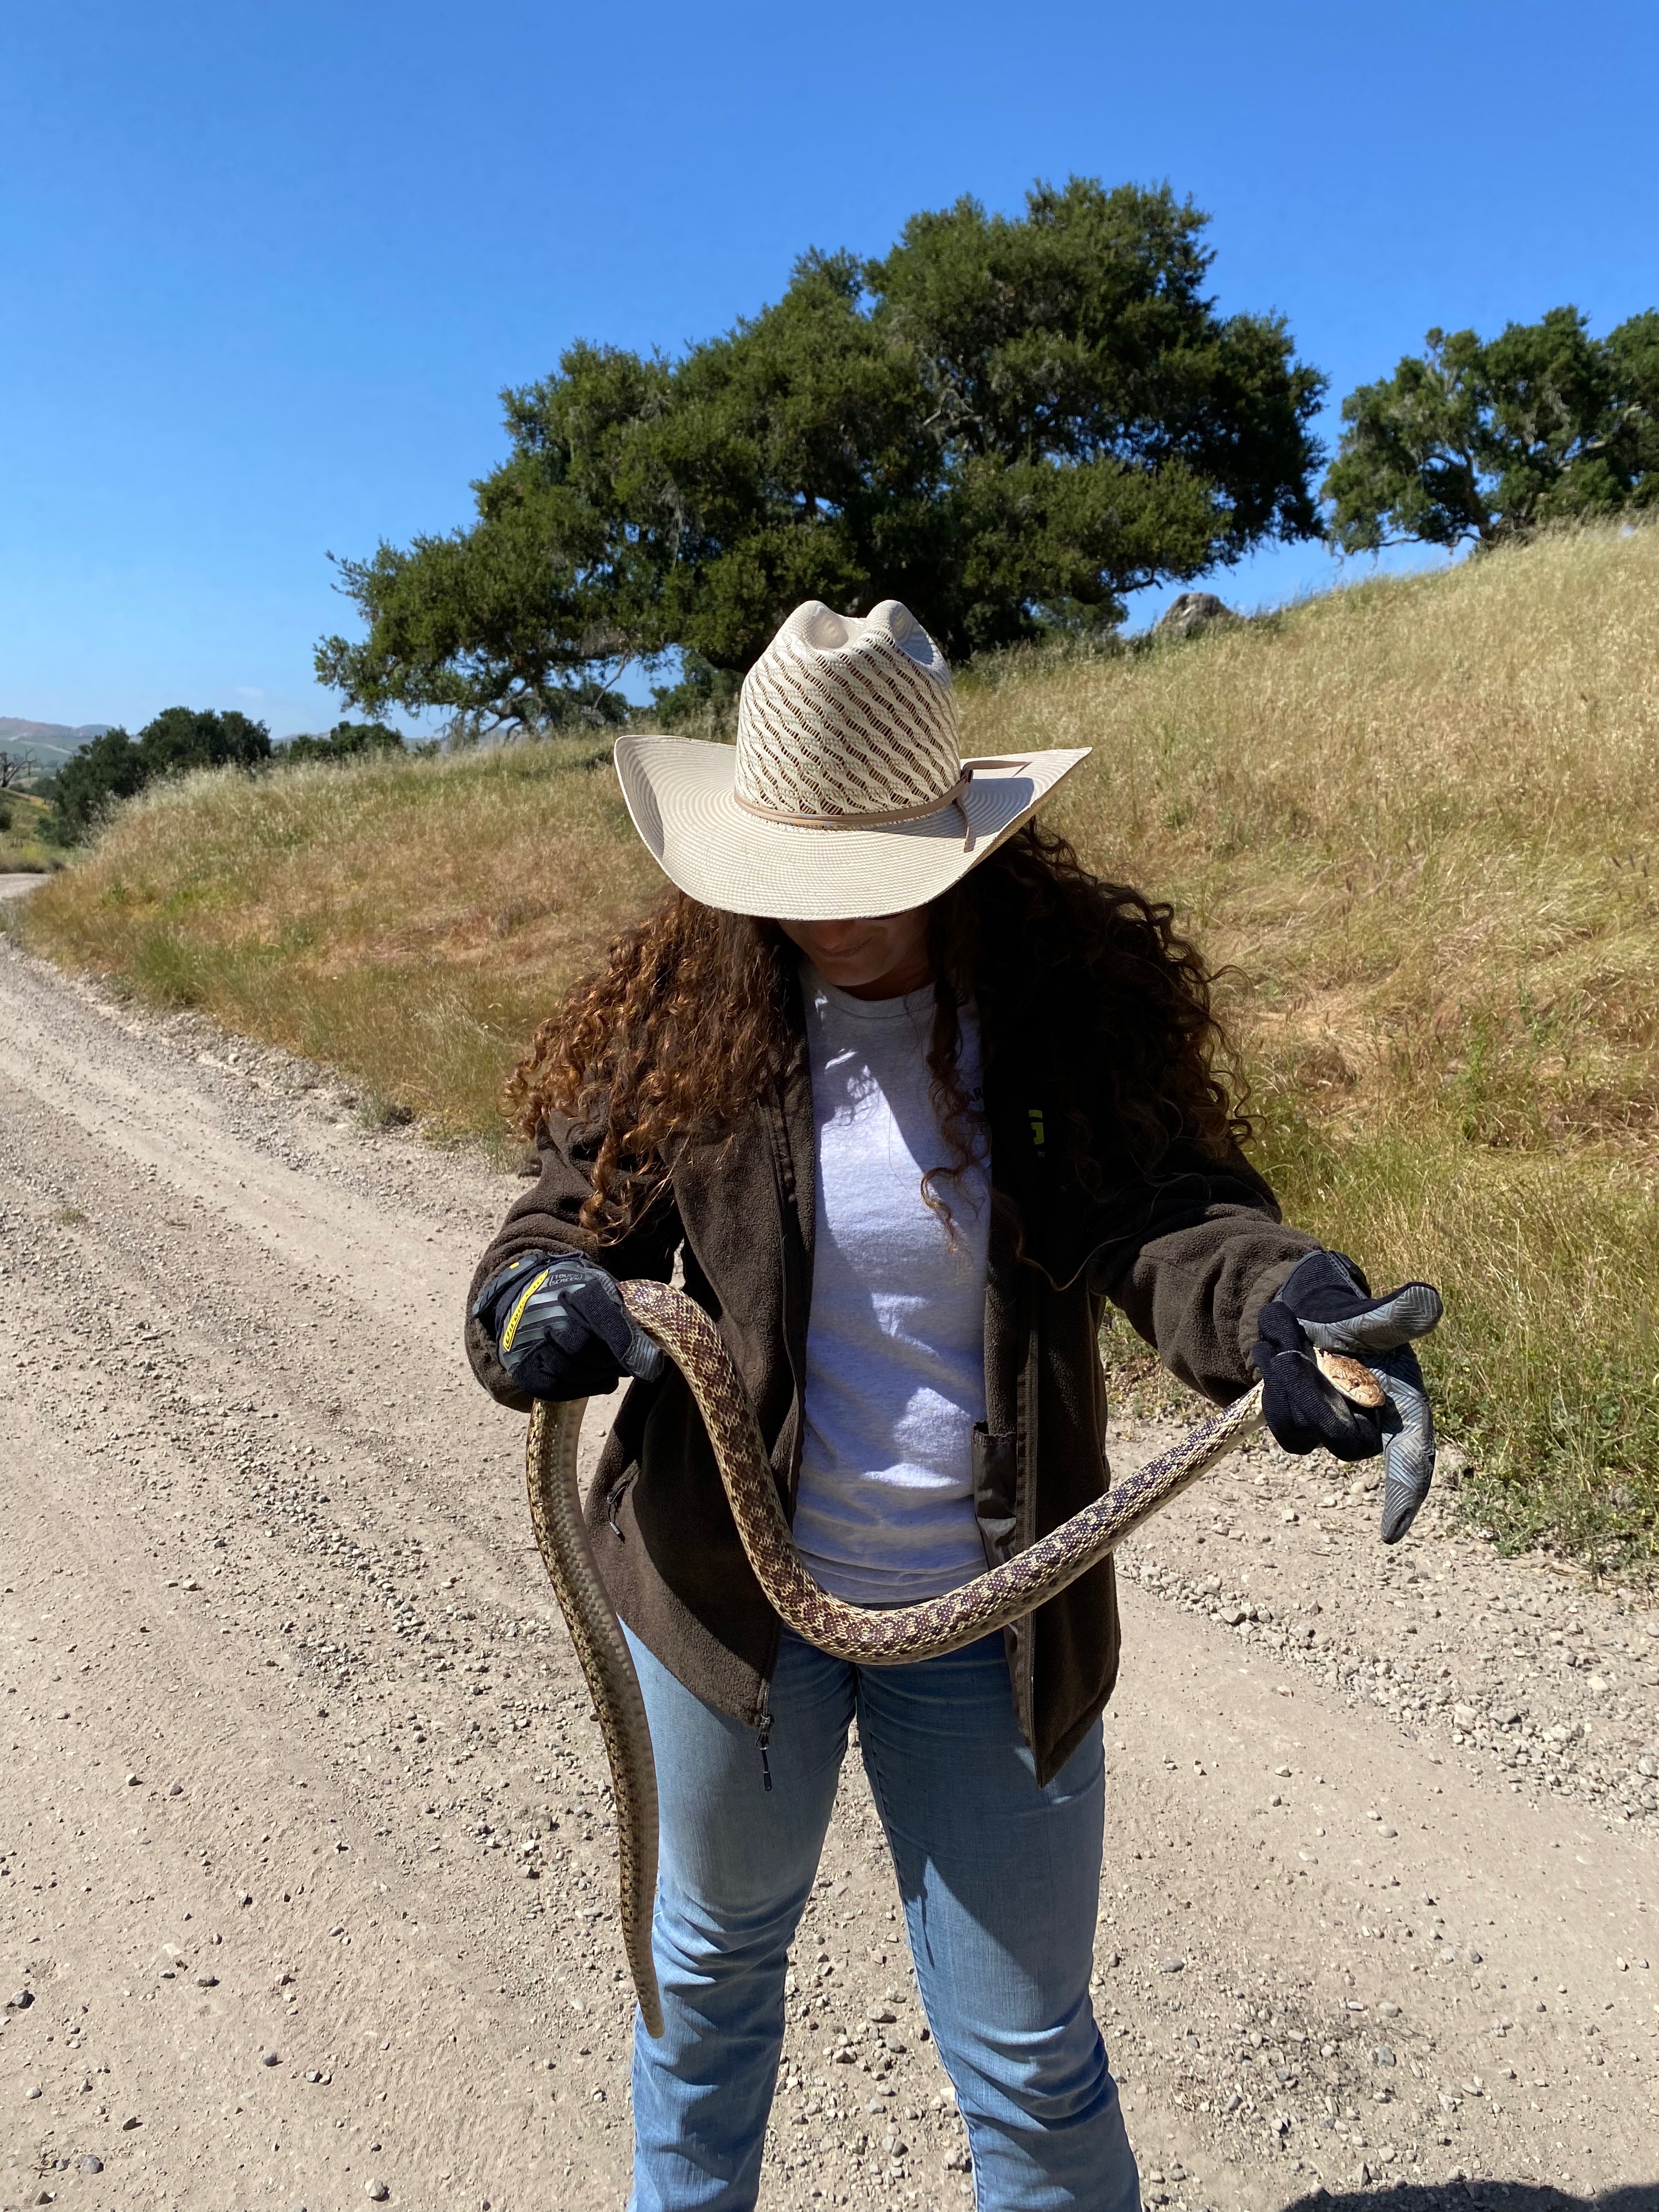 fun day on the ranch | image tagged in snake,ranch work,so fun | made w/ Imgflip meme maker